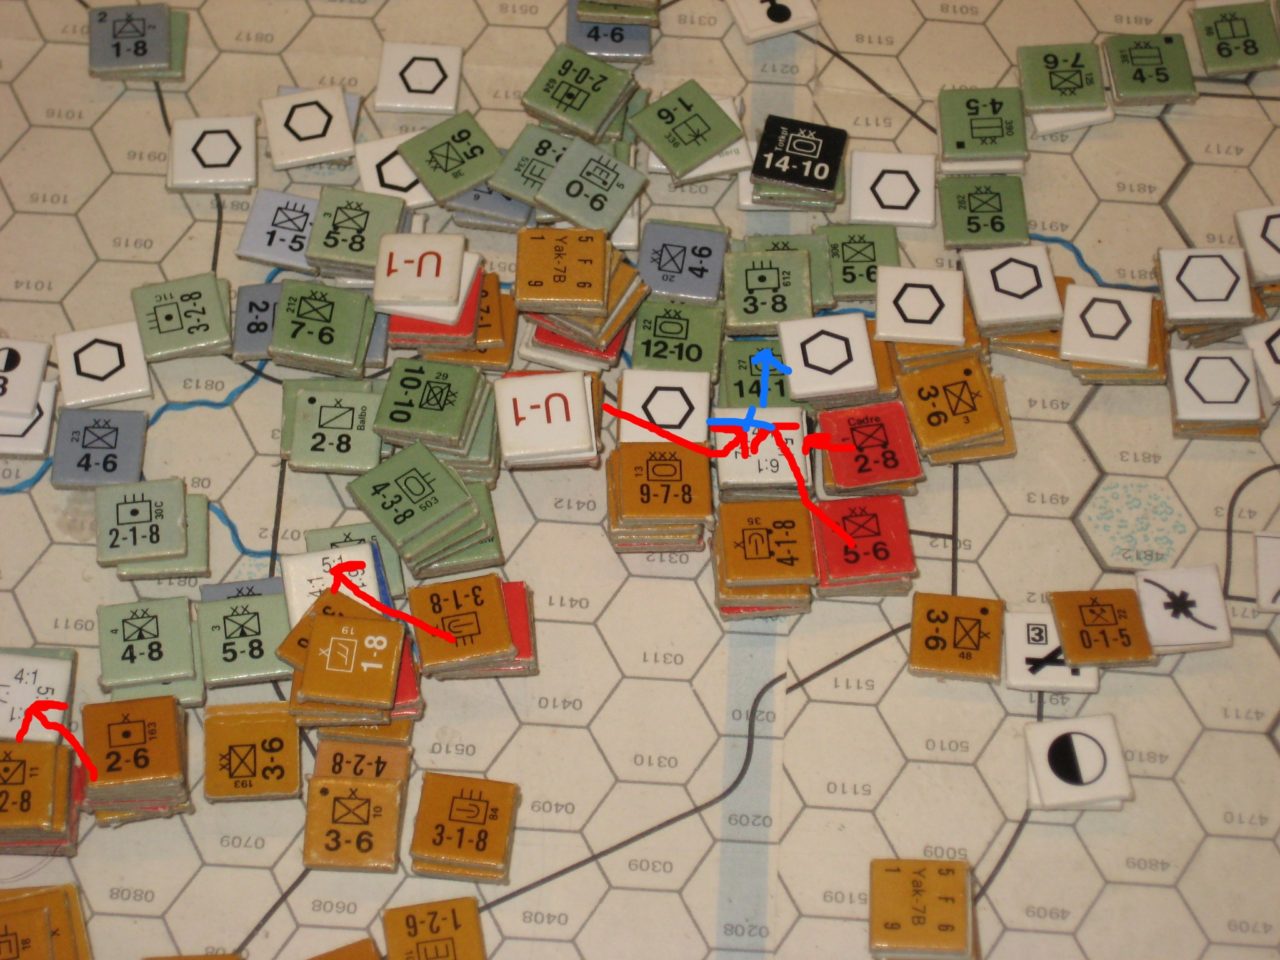 Soviet Turn: Soviet counterattack against the northern Axis pincer at Voronezh